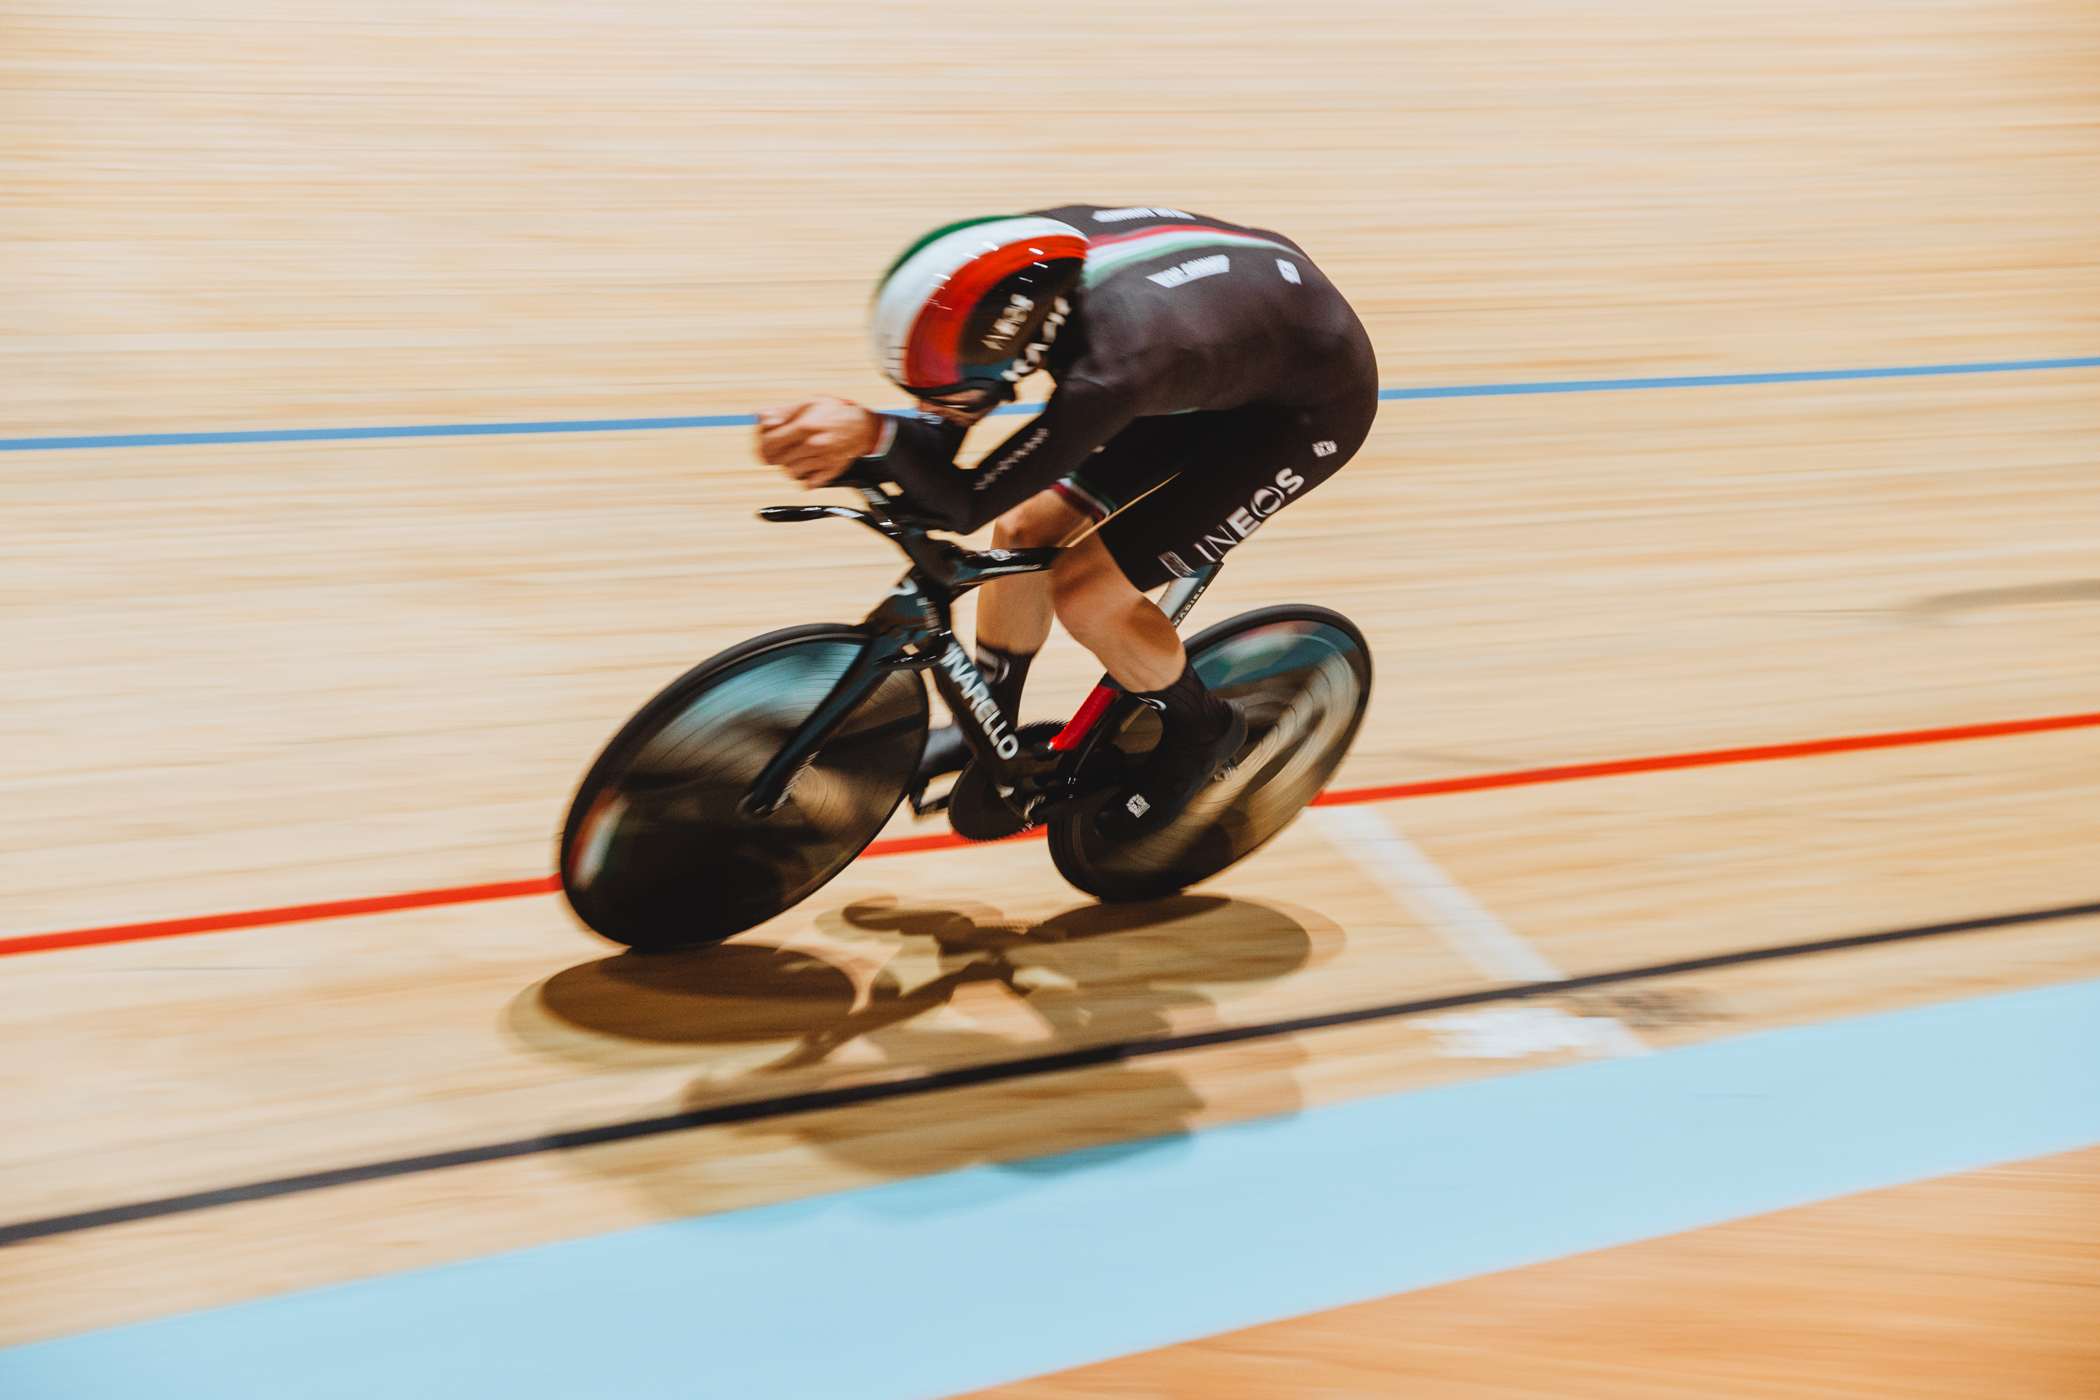 Filippo Ganna trains for Hour Record attempt 2022